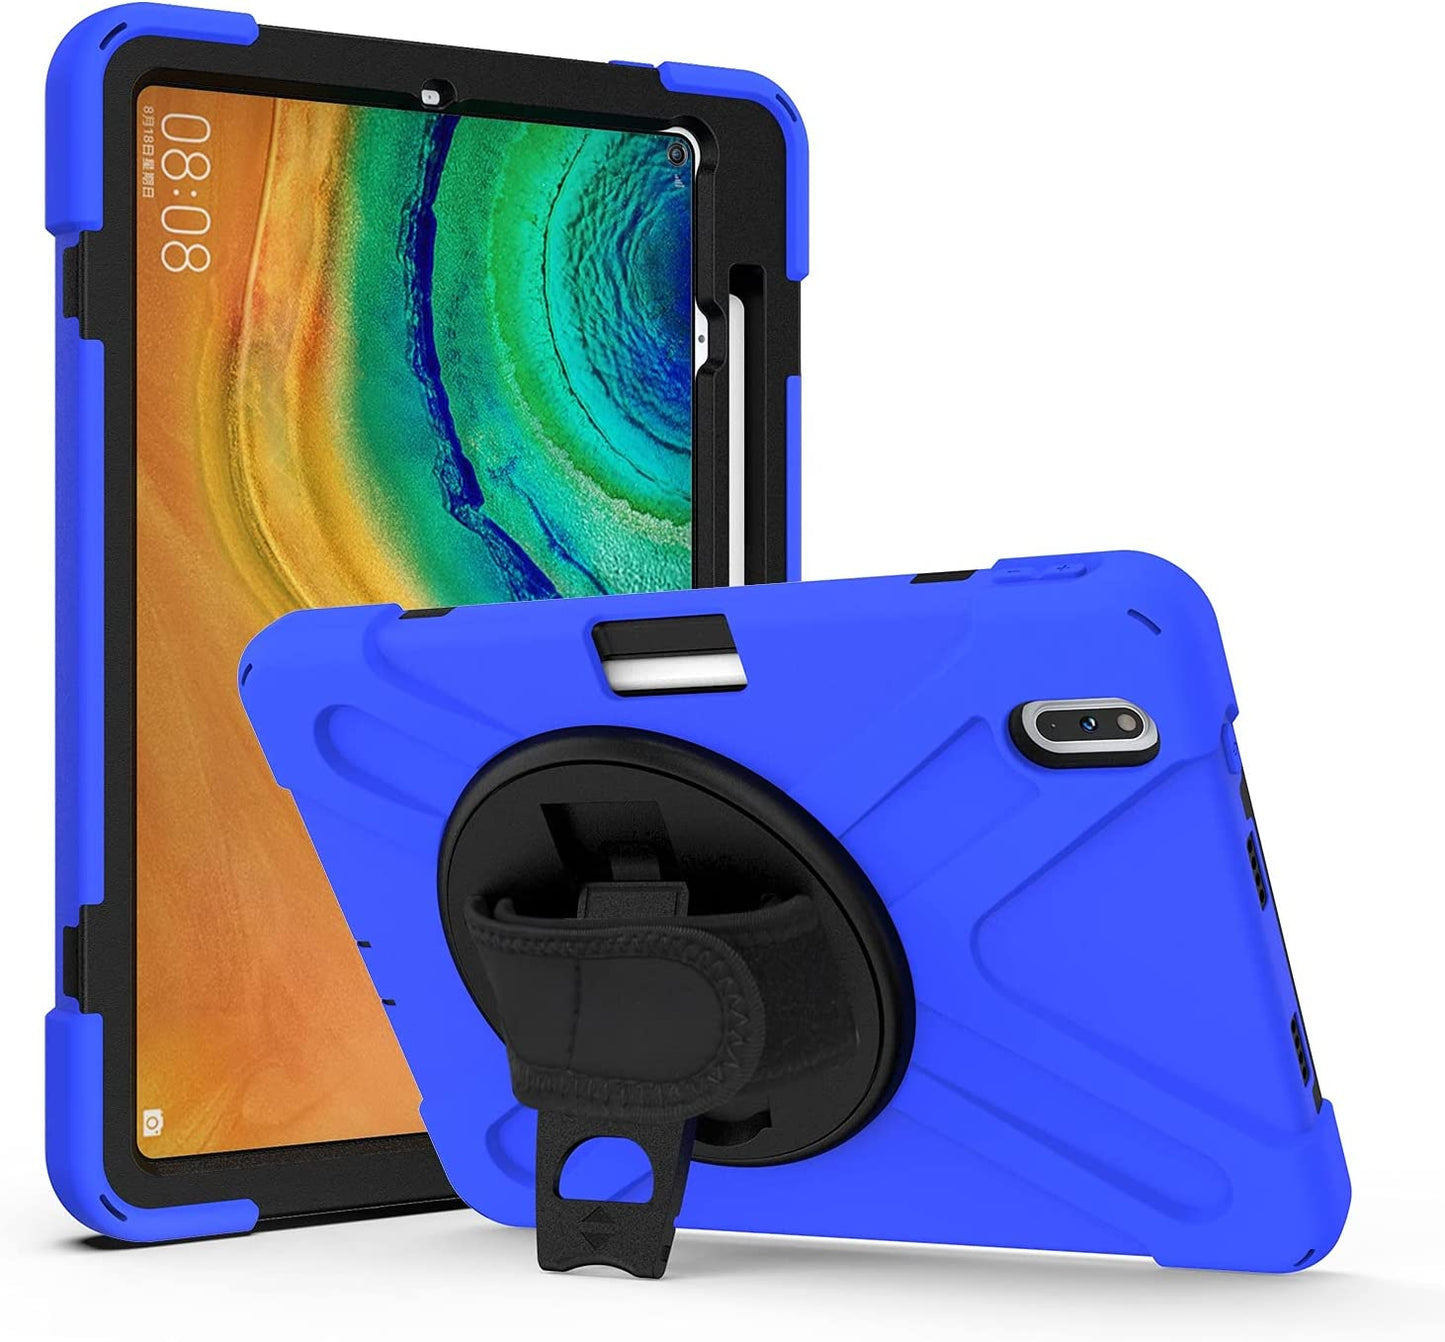 Table PC Case Protective Shell Tablet Cover Compatible with Huawei Matepad Pro 10.8/10.8 5G,Kids Full Body Shockproof Tablet Case with Hand Strap/Shoulder Strap Rotating Kickstand Protective Shell (C